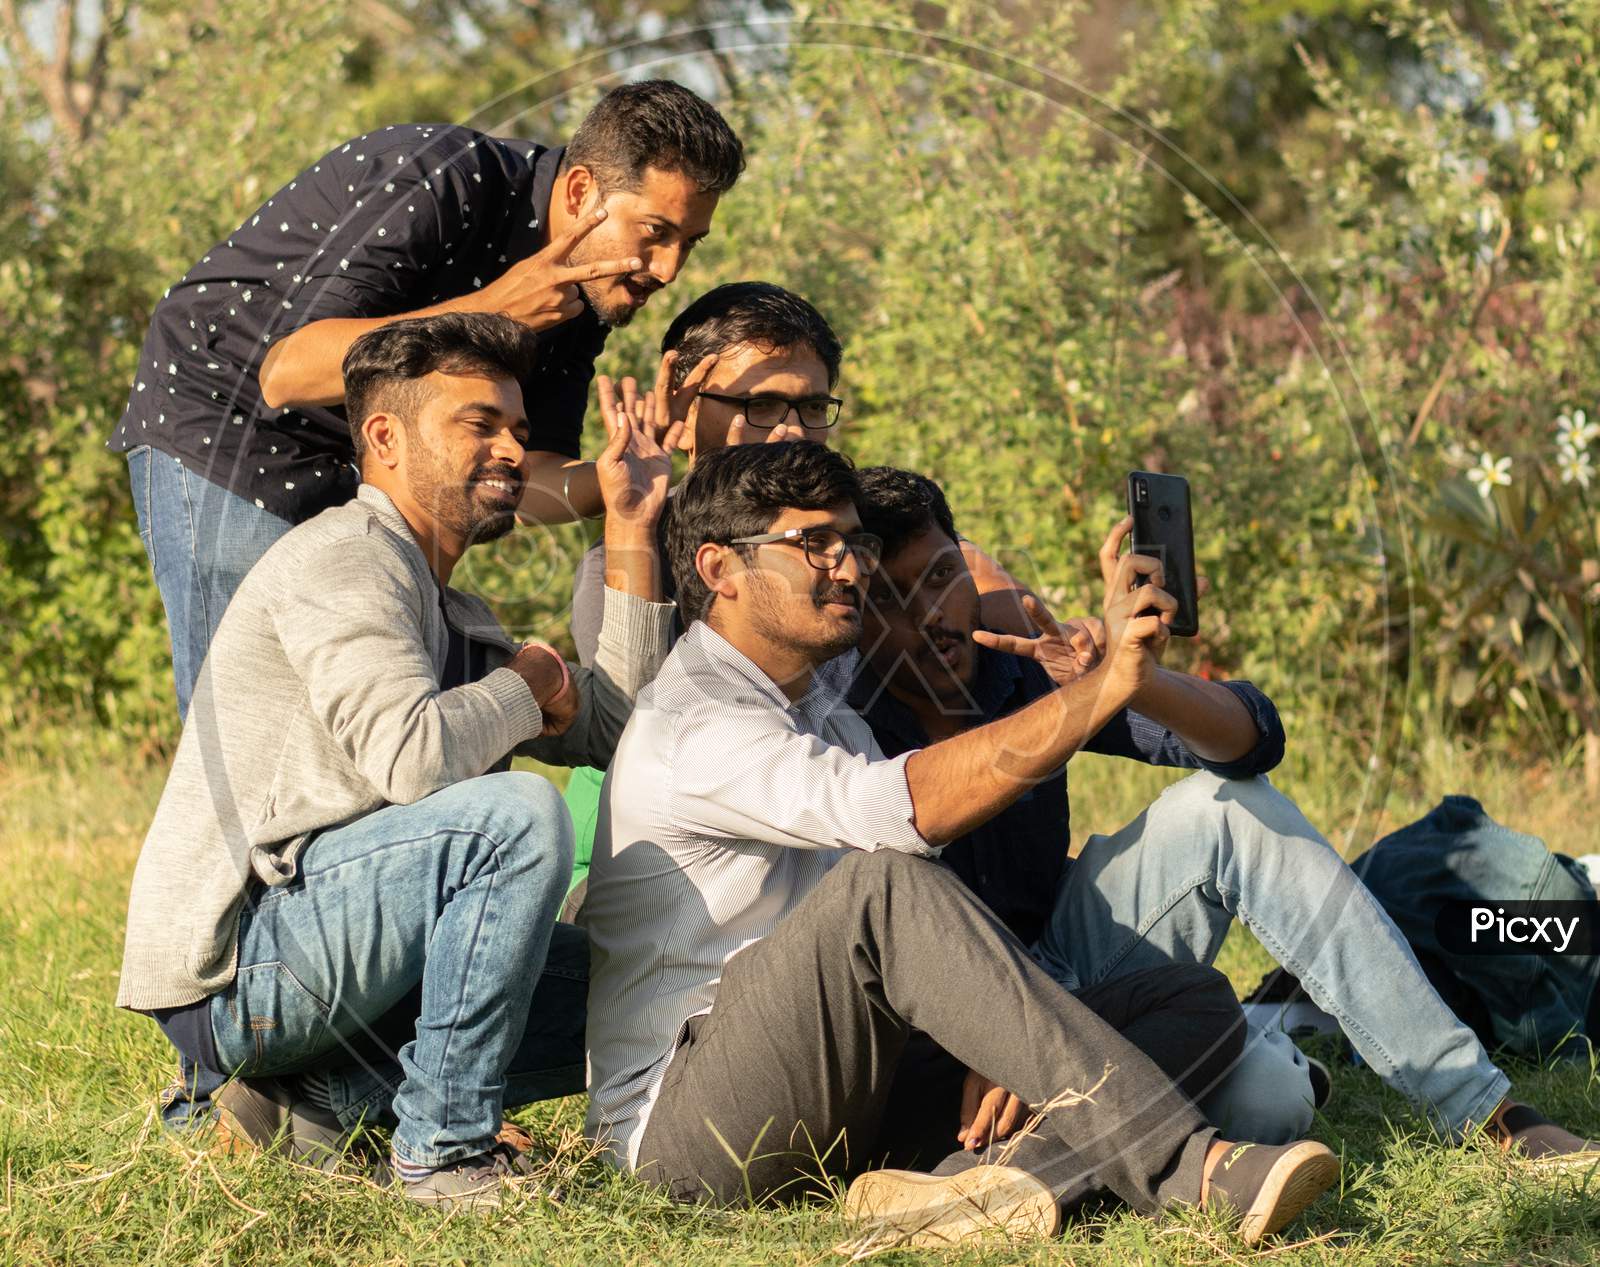 Group Of Friends Taking A Self Portrait In The Park - Concept Of Young People Addicted To Selfie - Three Friends Are Sitting On Bench In Park And Taking Selfie At Park